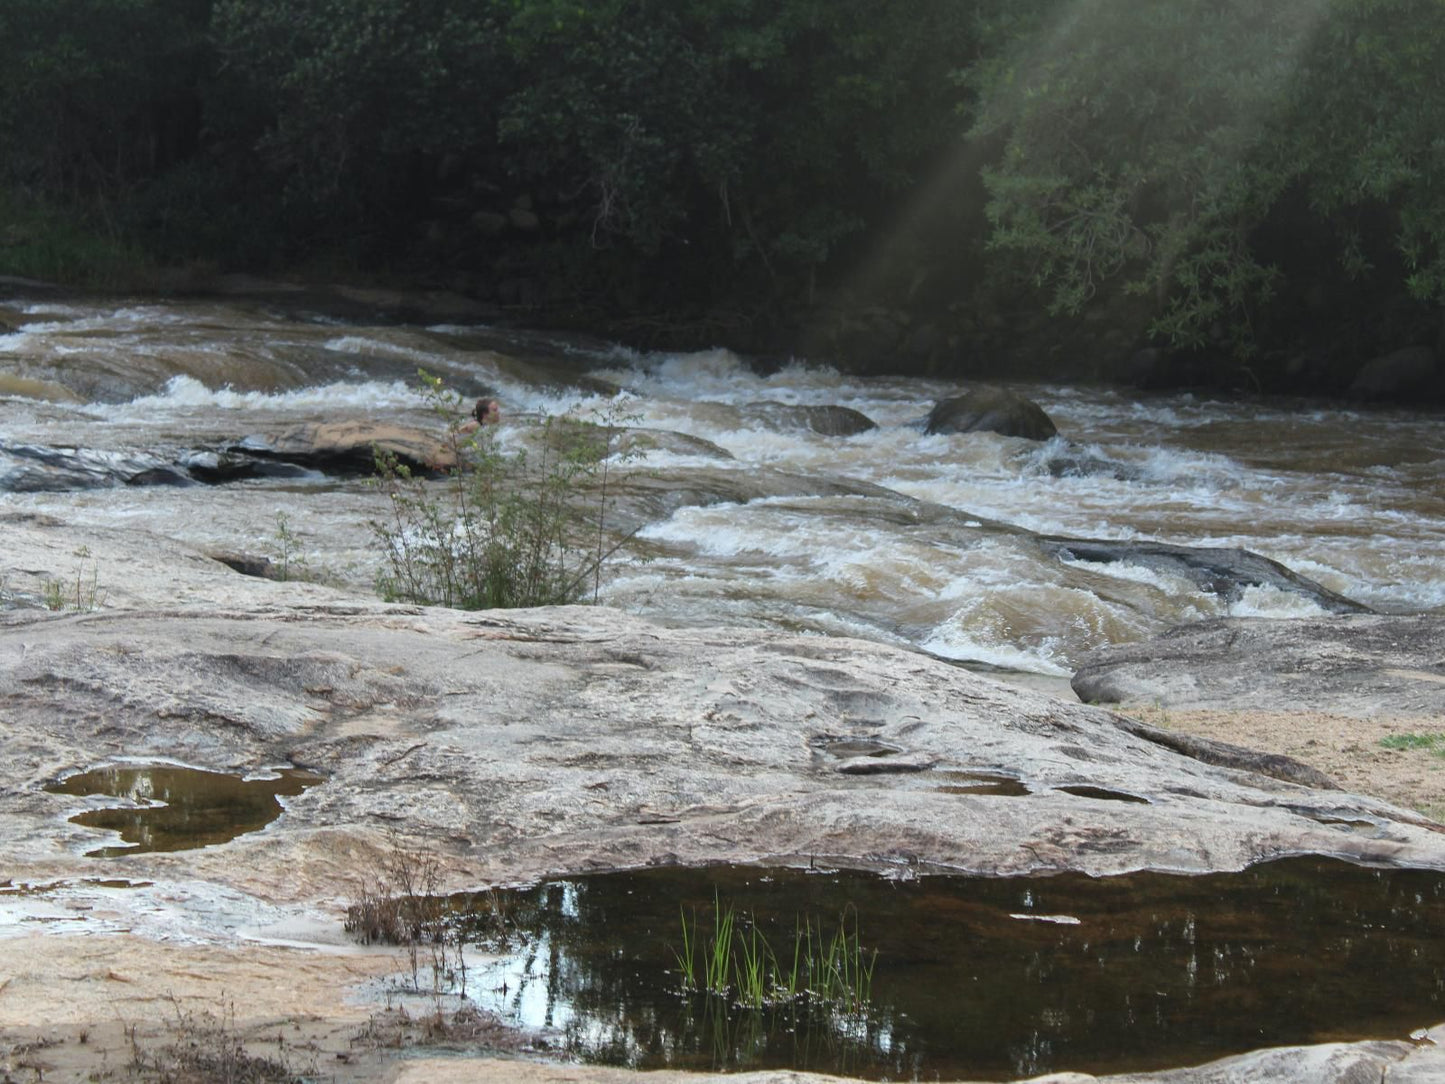 Lions Rock Rapids Hazyview Mpumalanga South Africa Unsaturated, River, Nature, Waters, Tree, Plant, Wood, Waterfall